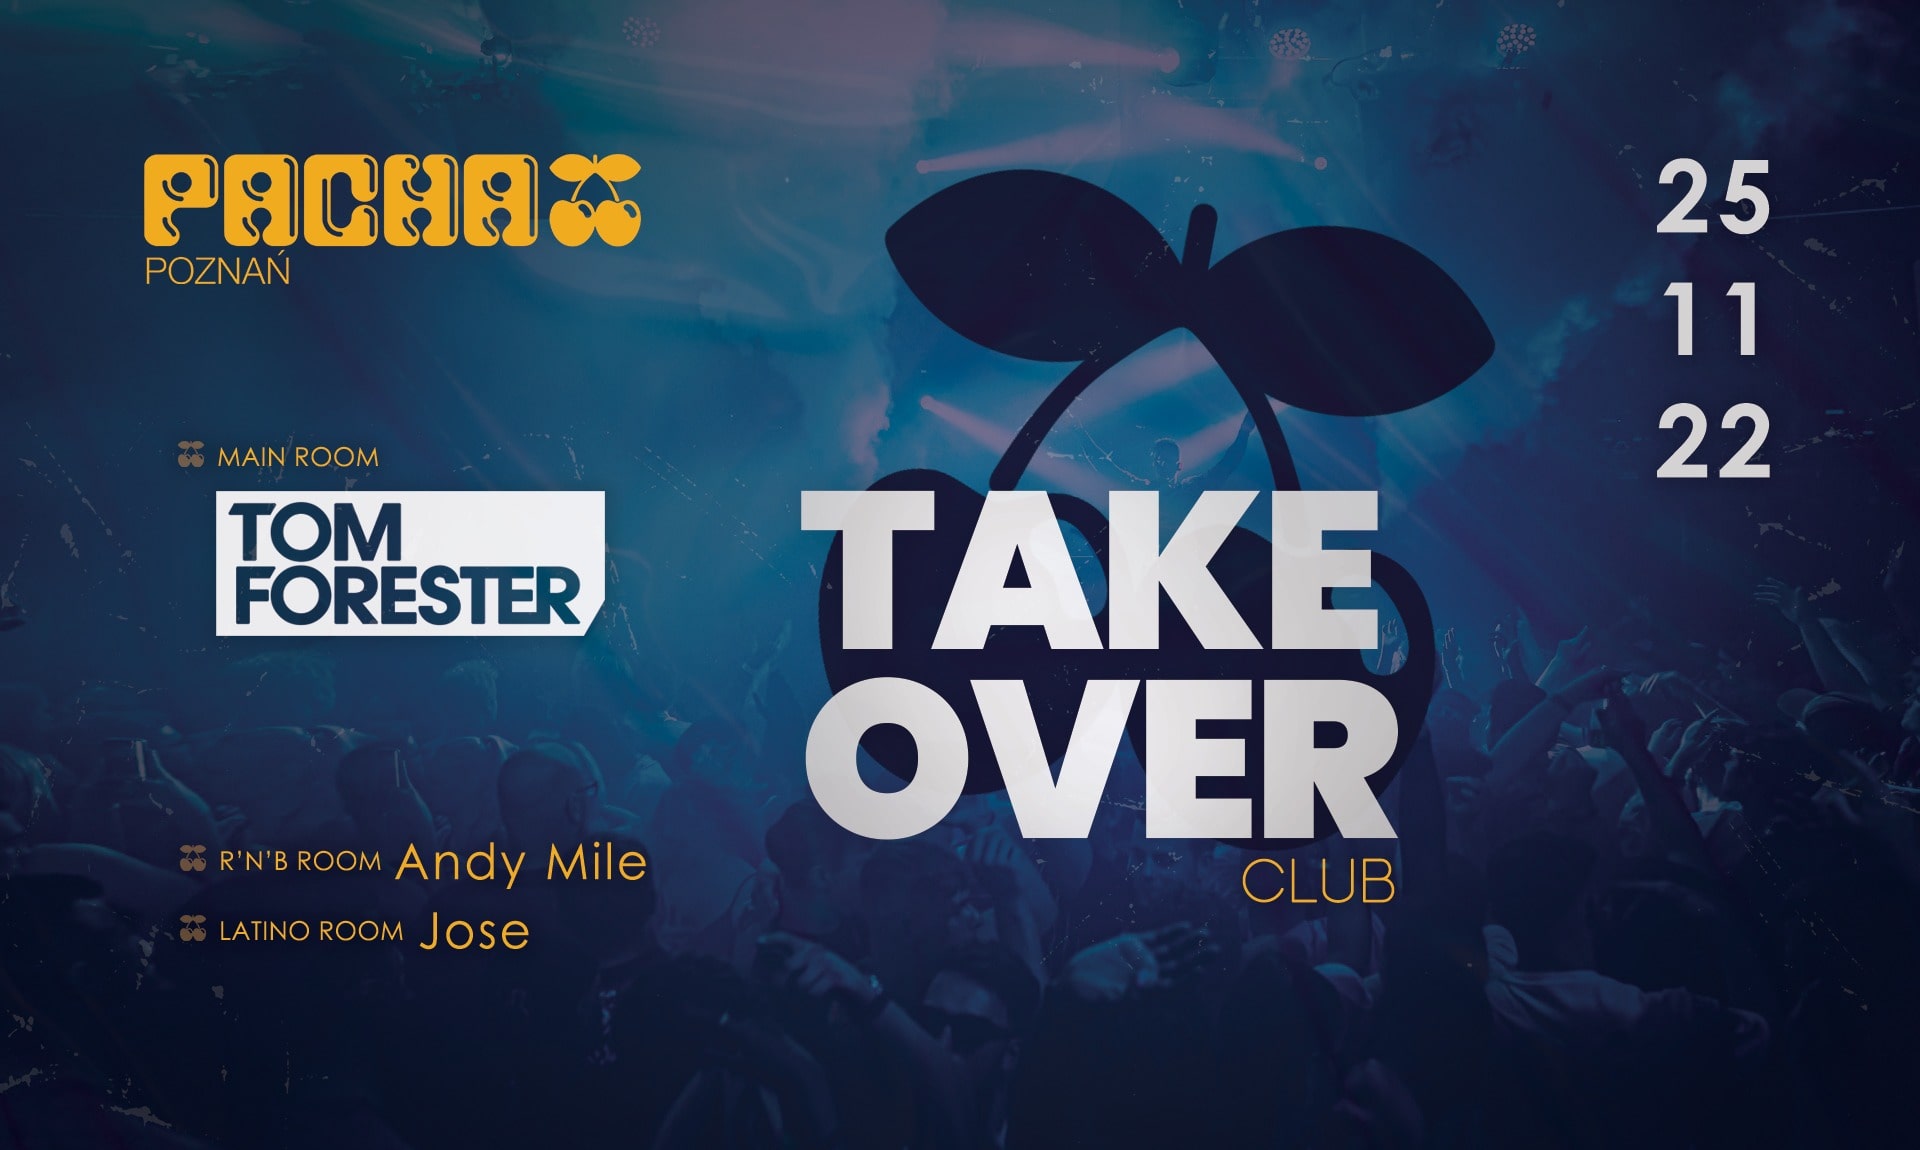 Club Take Over | Tom Forester